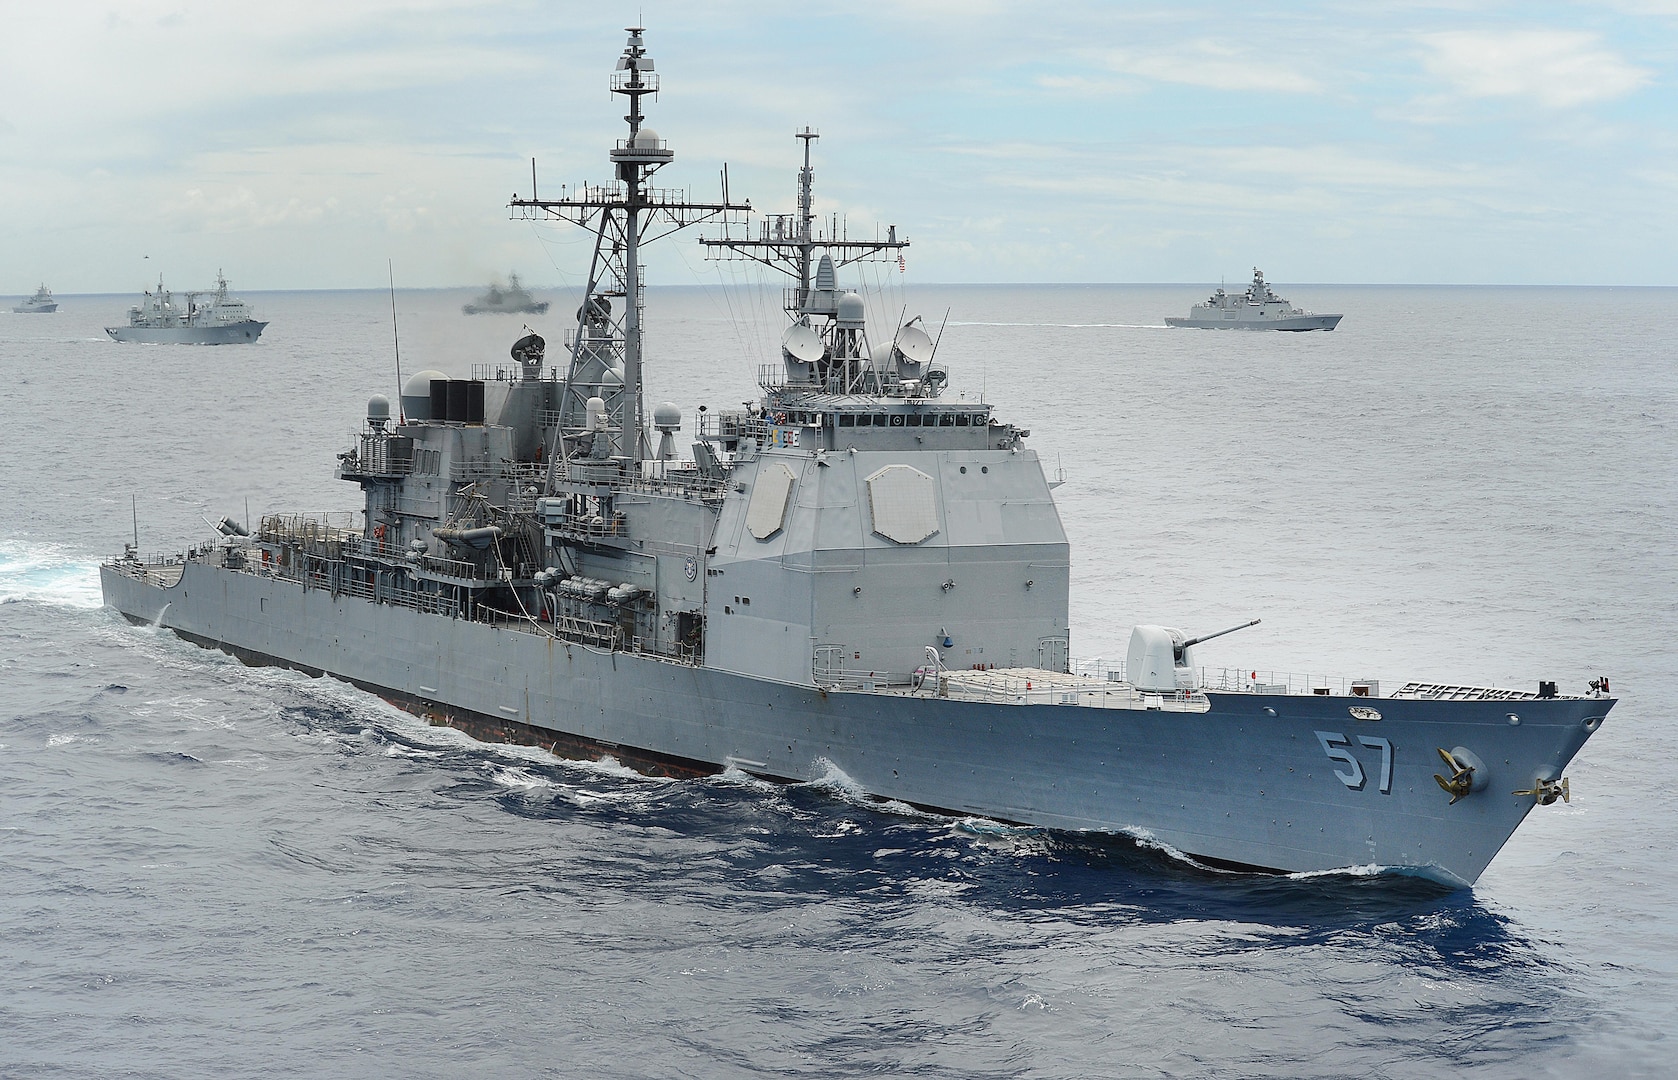 140725-N-FC670-226 PACIFIC OCEAN (July 25, 2014) The guided-missile cruiser USS Lake Champlain (CG 57) underway in close formation as one of forty-two ships and submarines representing 15 international partner nations during Rim of the Pacific (RIMPAC) 2014. Champlain is currently conducting live-fire testing off the coast of California with its 5-inch guns to verify the new mode on the SPQ-9B while the crew undergoes operator training to ensure proficiency with the new capability. (U.S. Navy photo by Mass Communication Specialist 1st Class Shannon Renfroe/Released)